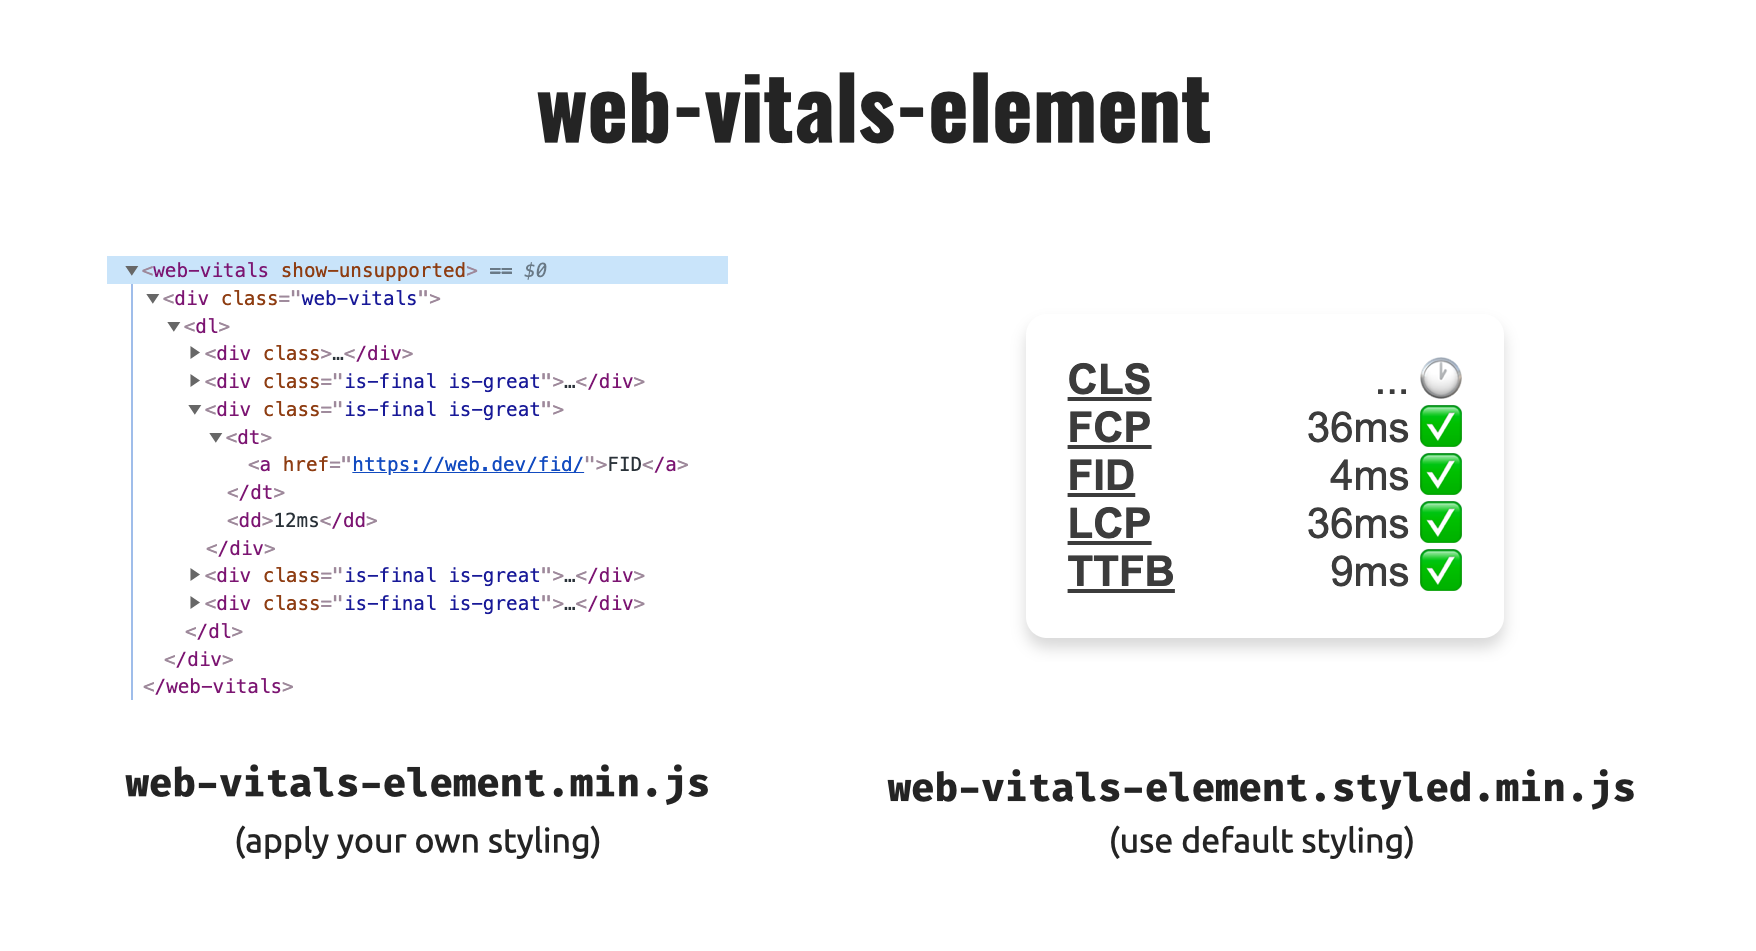 web-vitals-element in styled and unstyled version